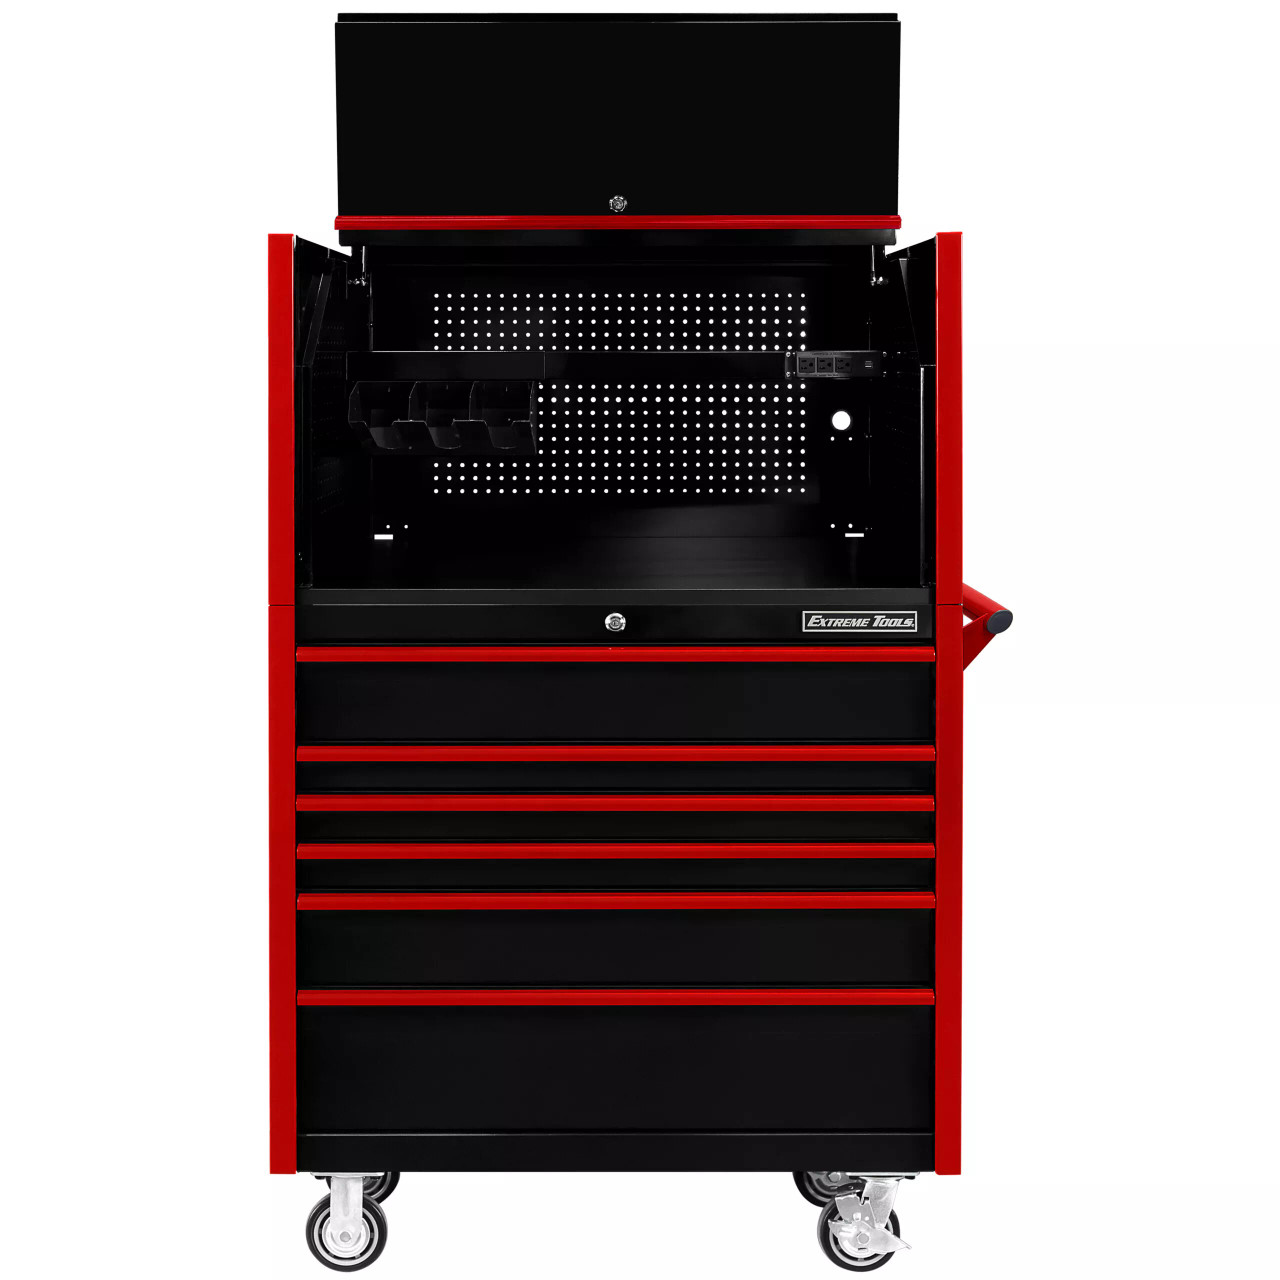 Extreme Tools DX4107HRKR 41" Power Workstation and Roller Cabinet Combo - Black with Red Pulls